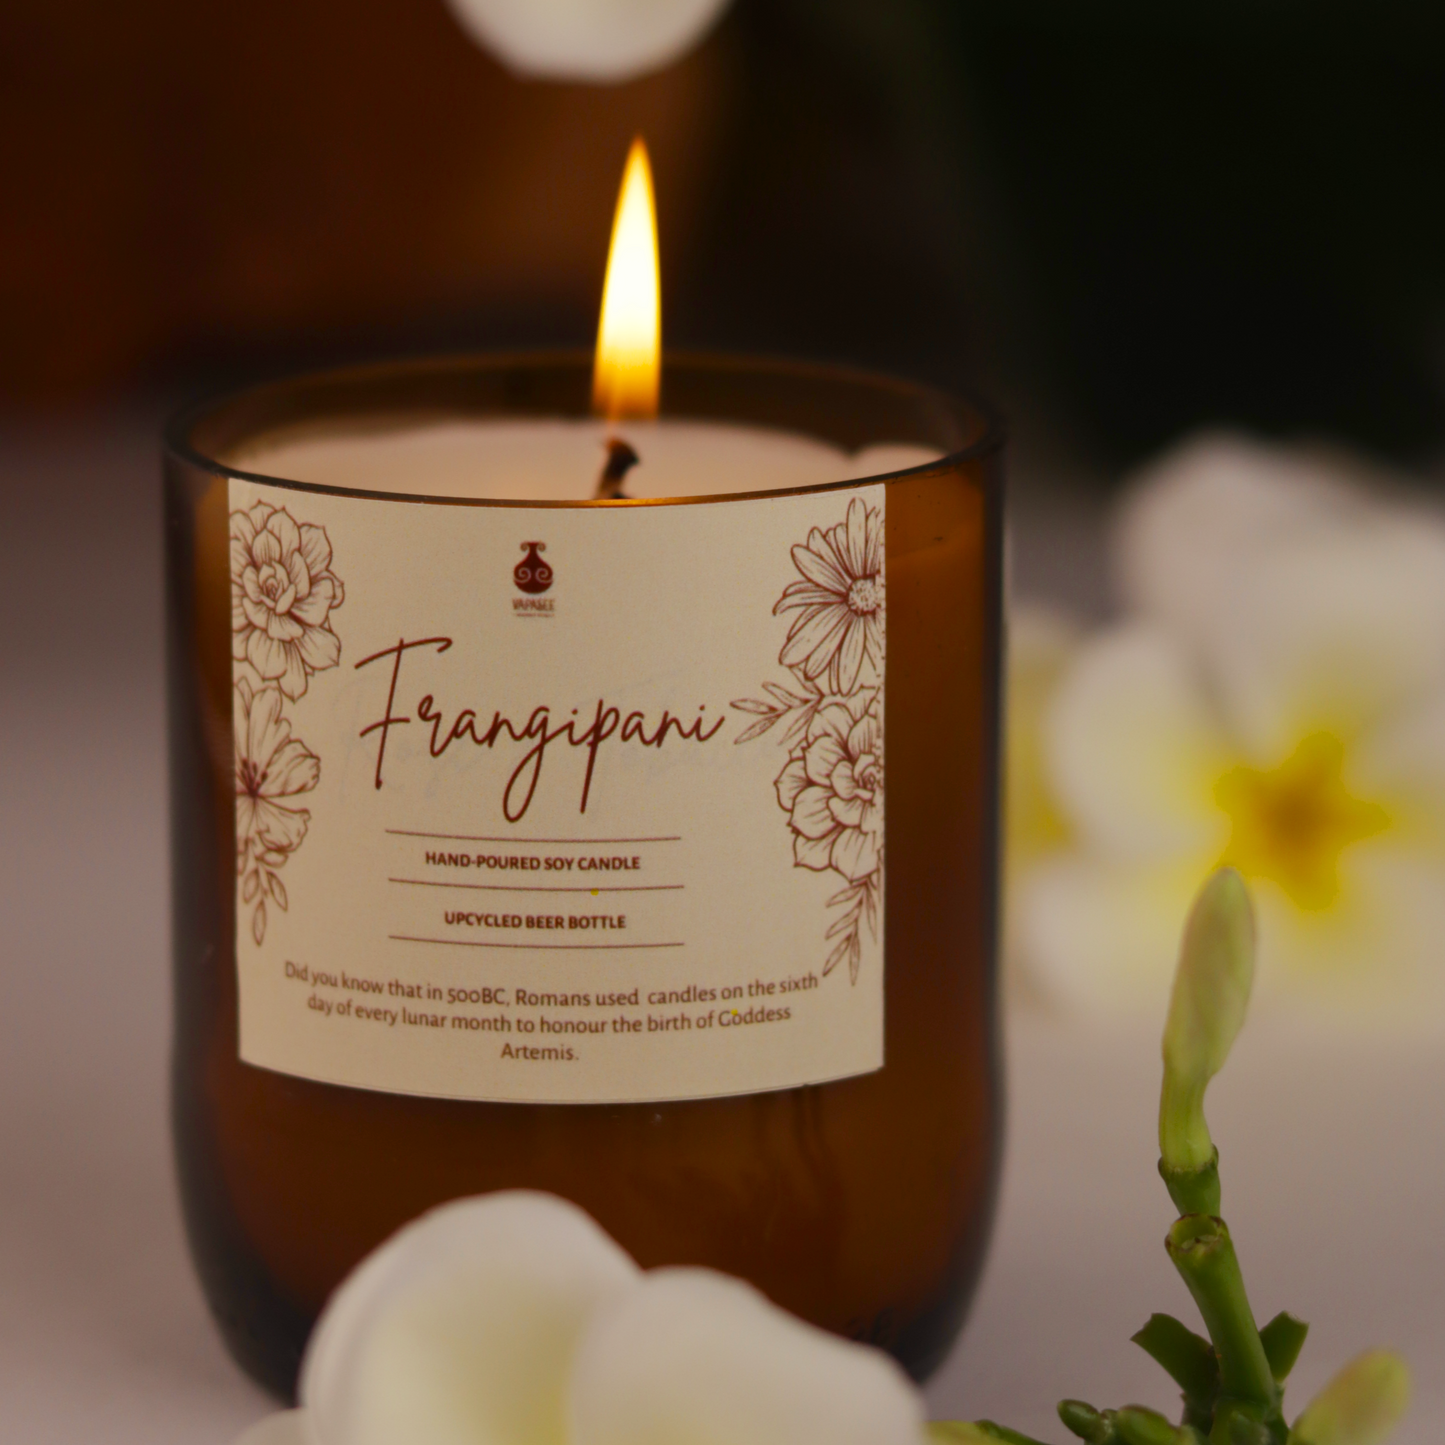 Frangipani Scented Hand Poured Soy Candle in Upcycled Glass Bottle by Vapasee- Pack of 1 : 300 gms